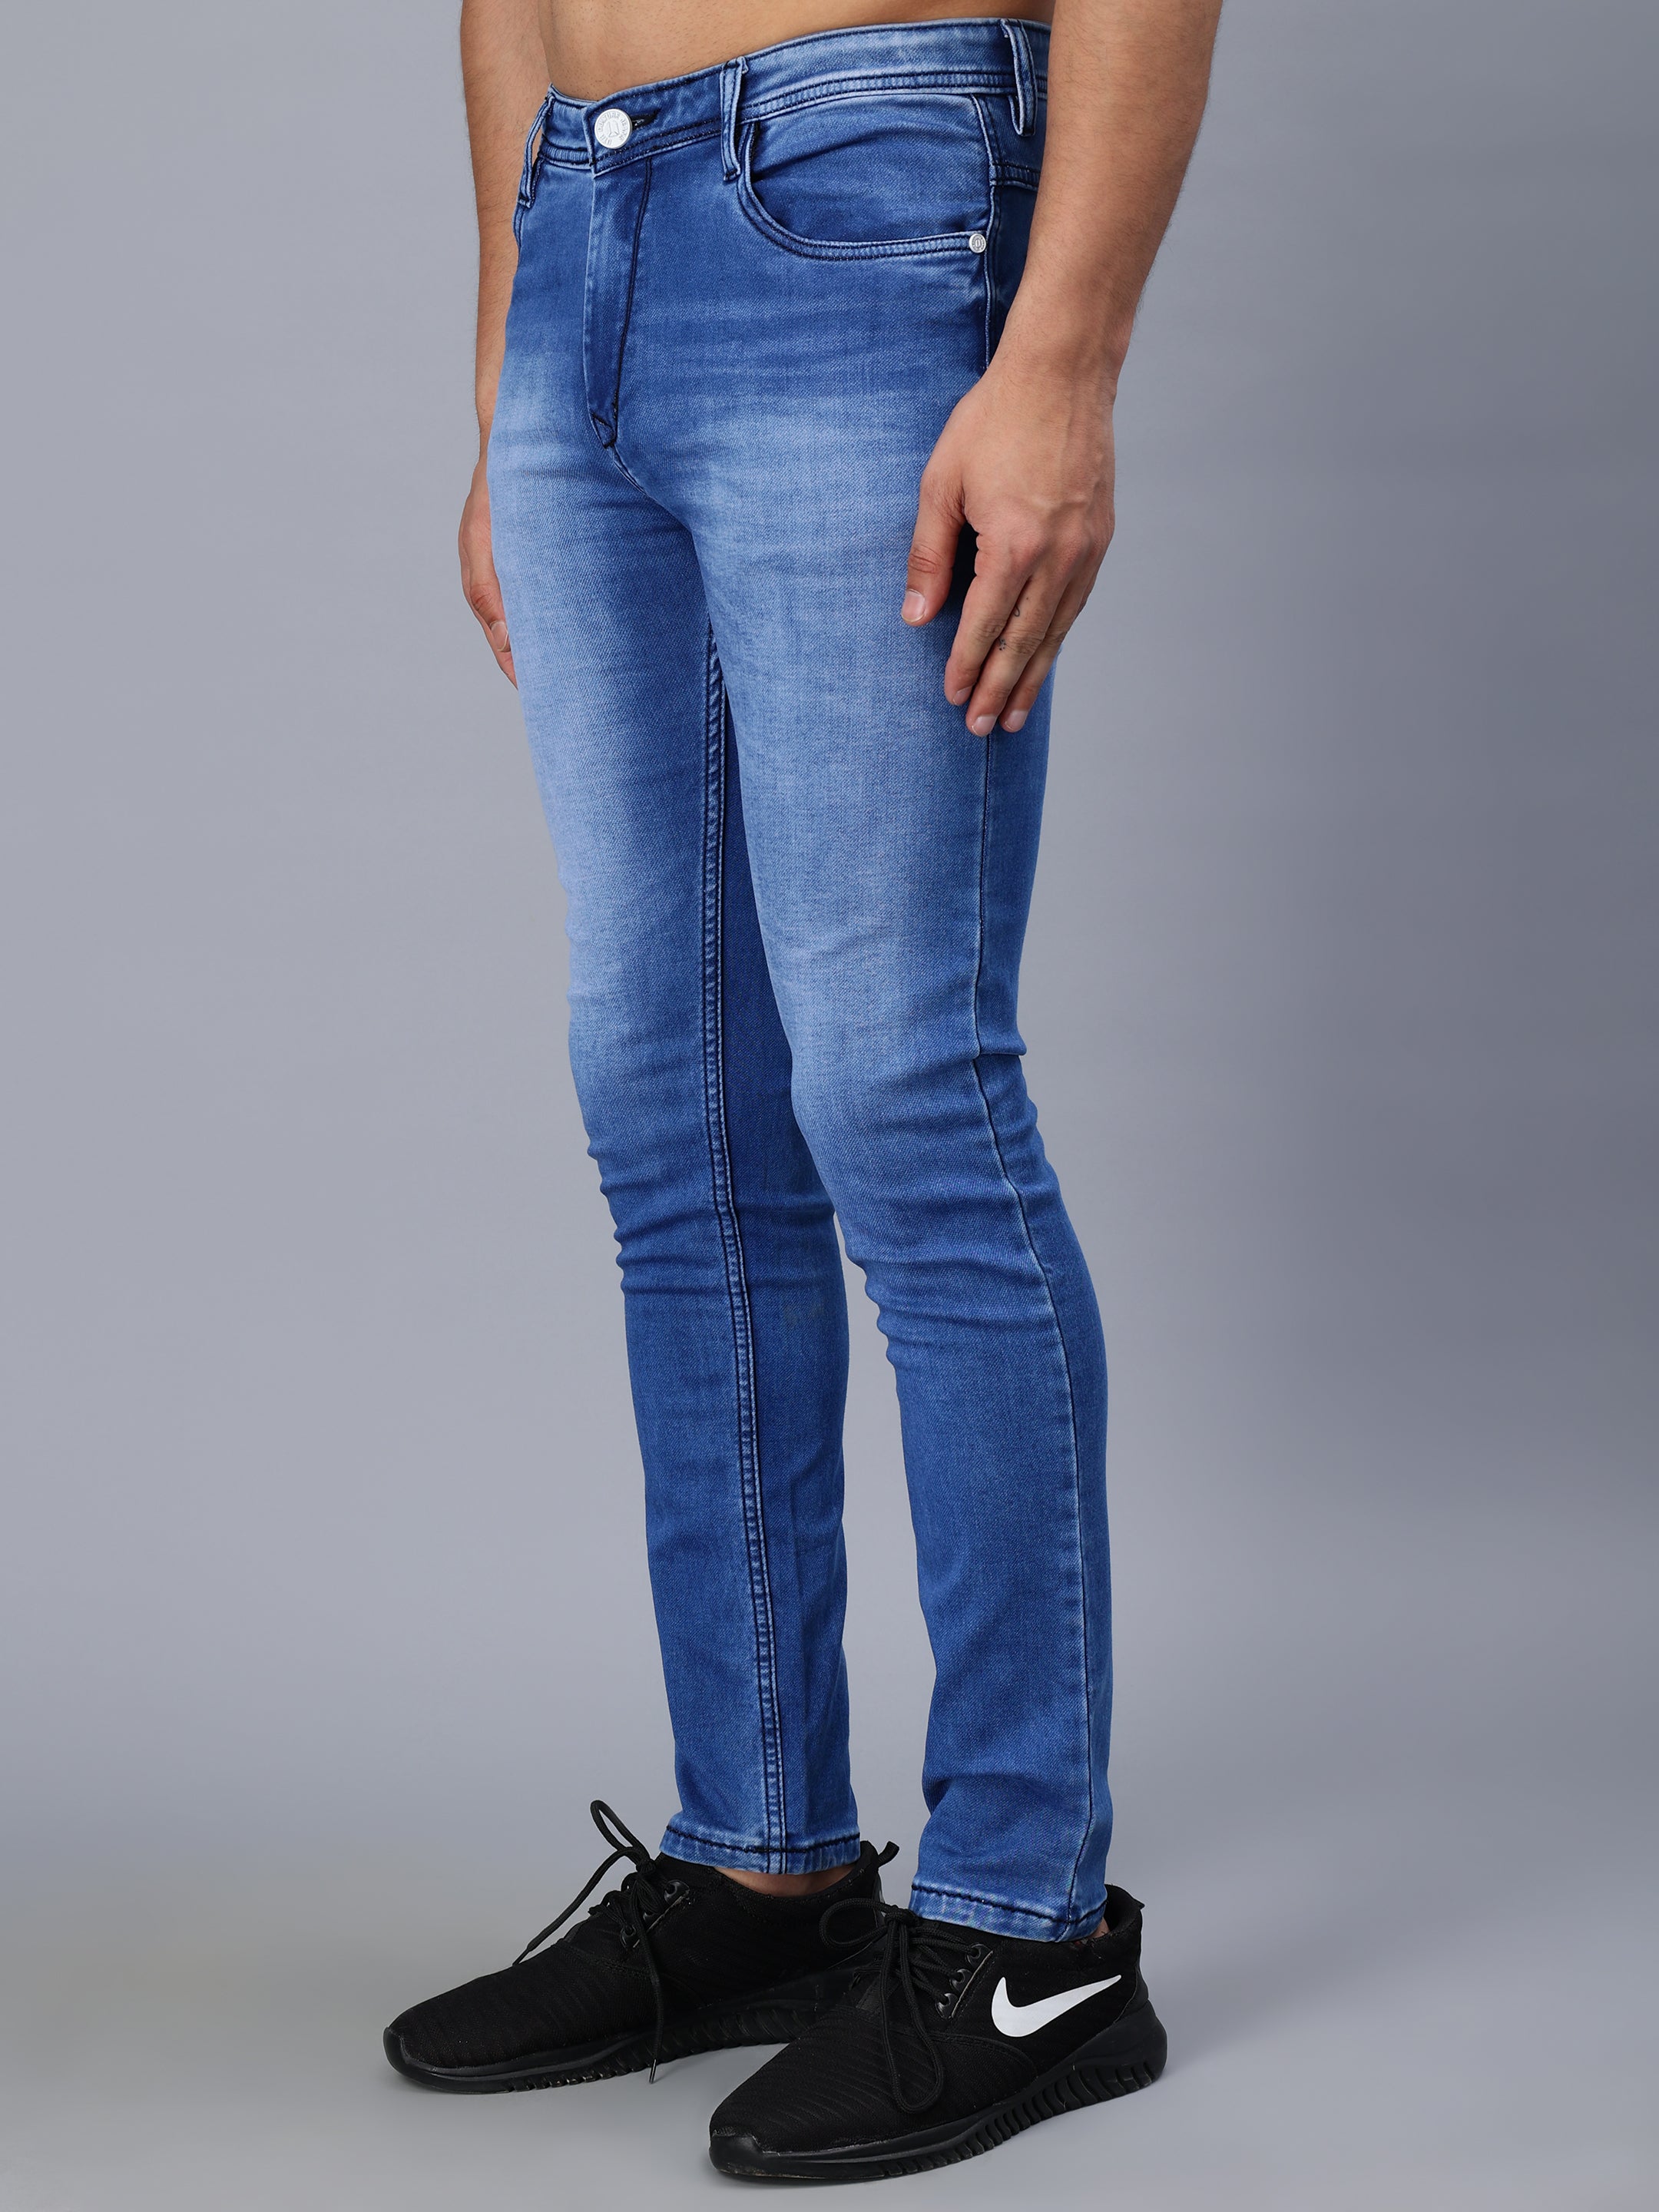 CLASSIC BLUE WASH SKINNY FIT JEANS